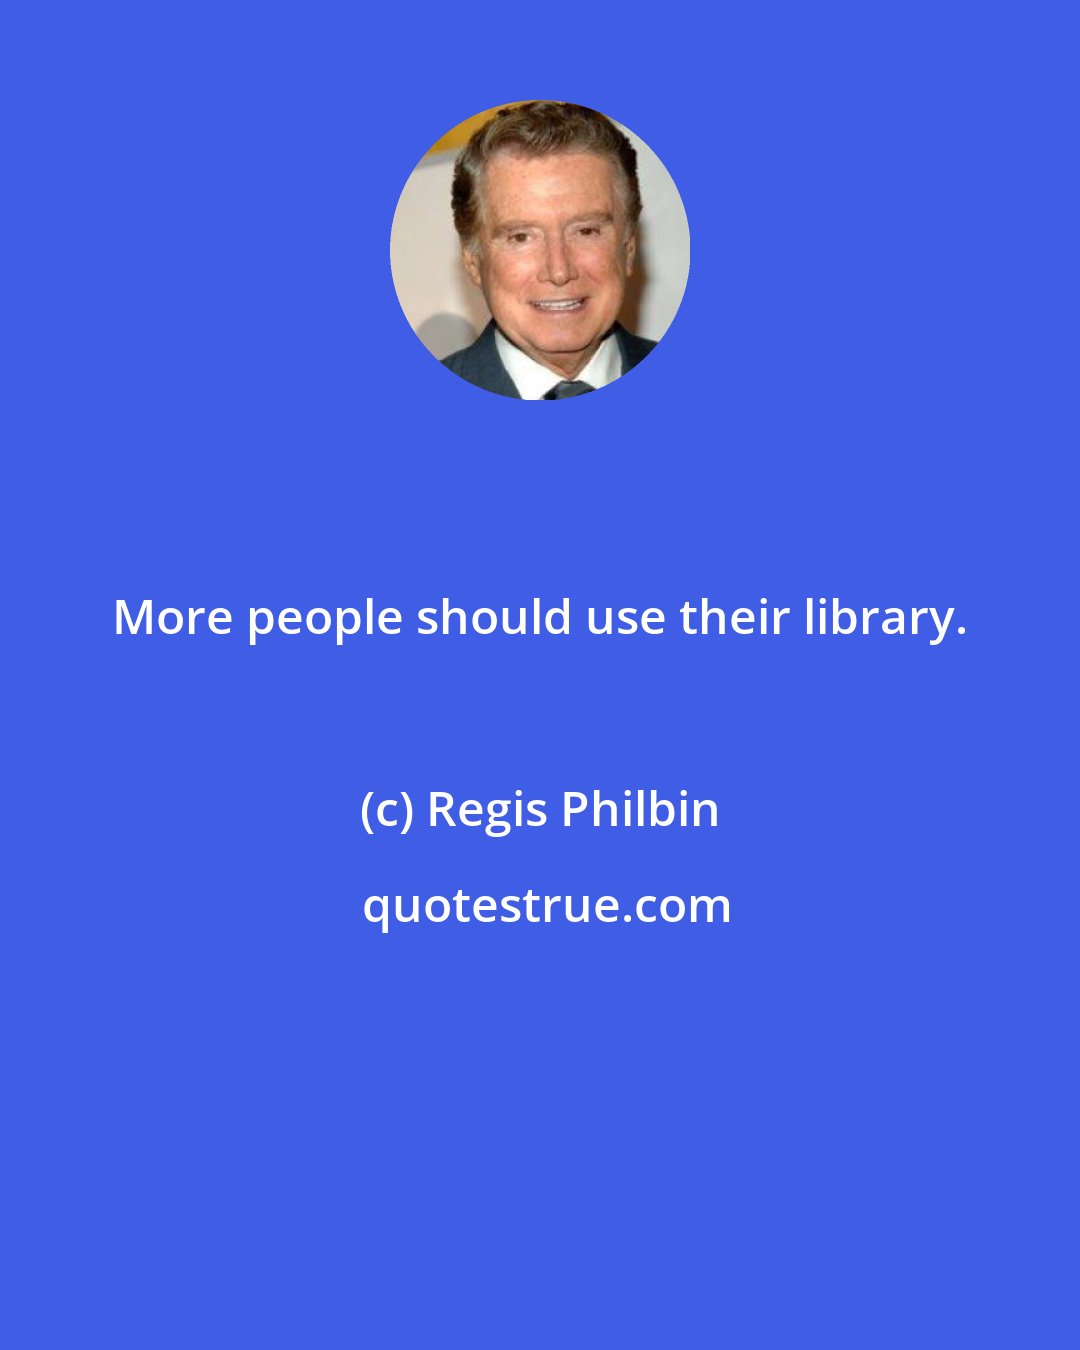 Regis Philbin: More people should use their library.